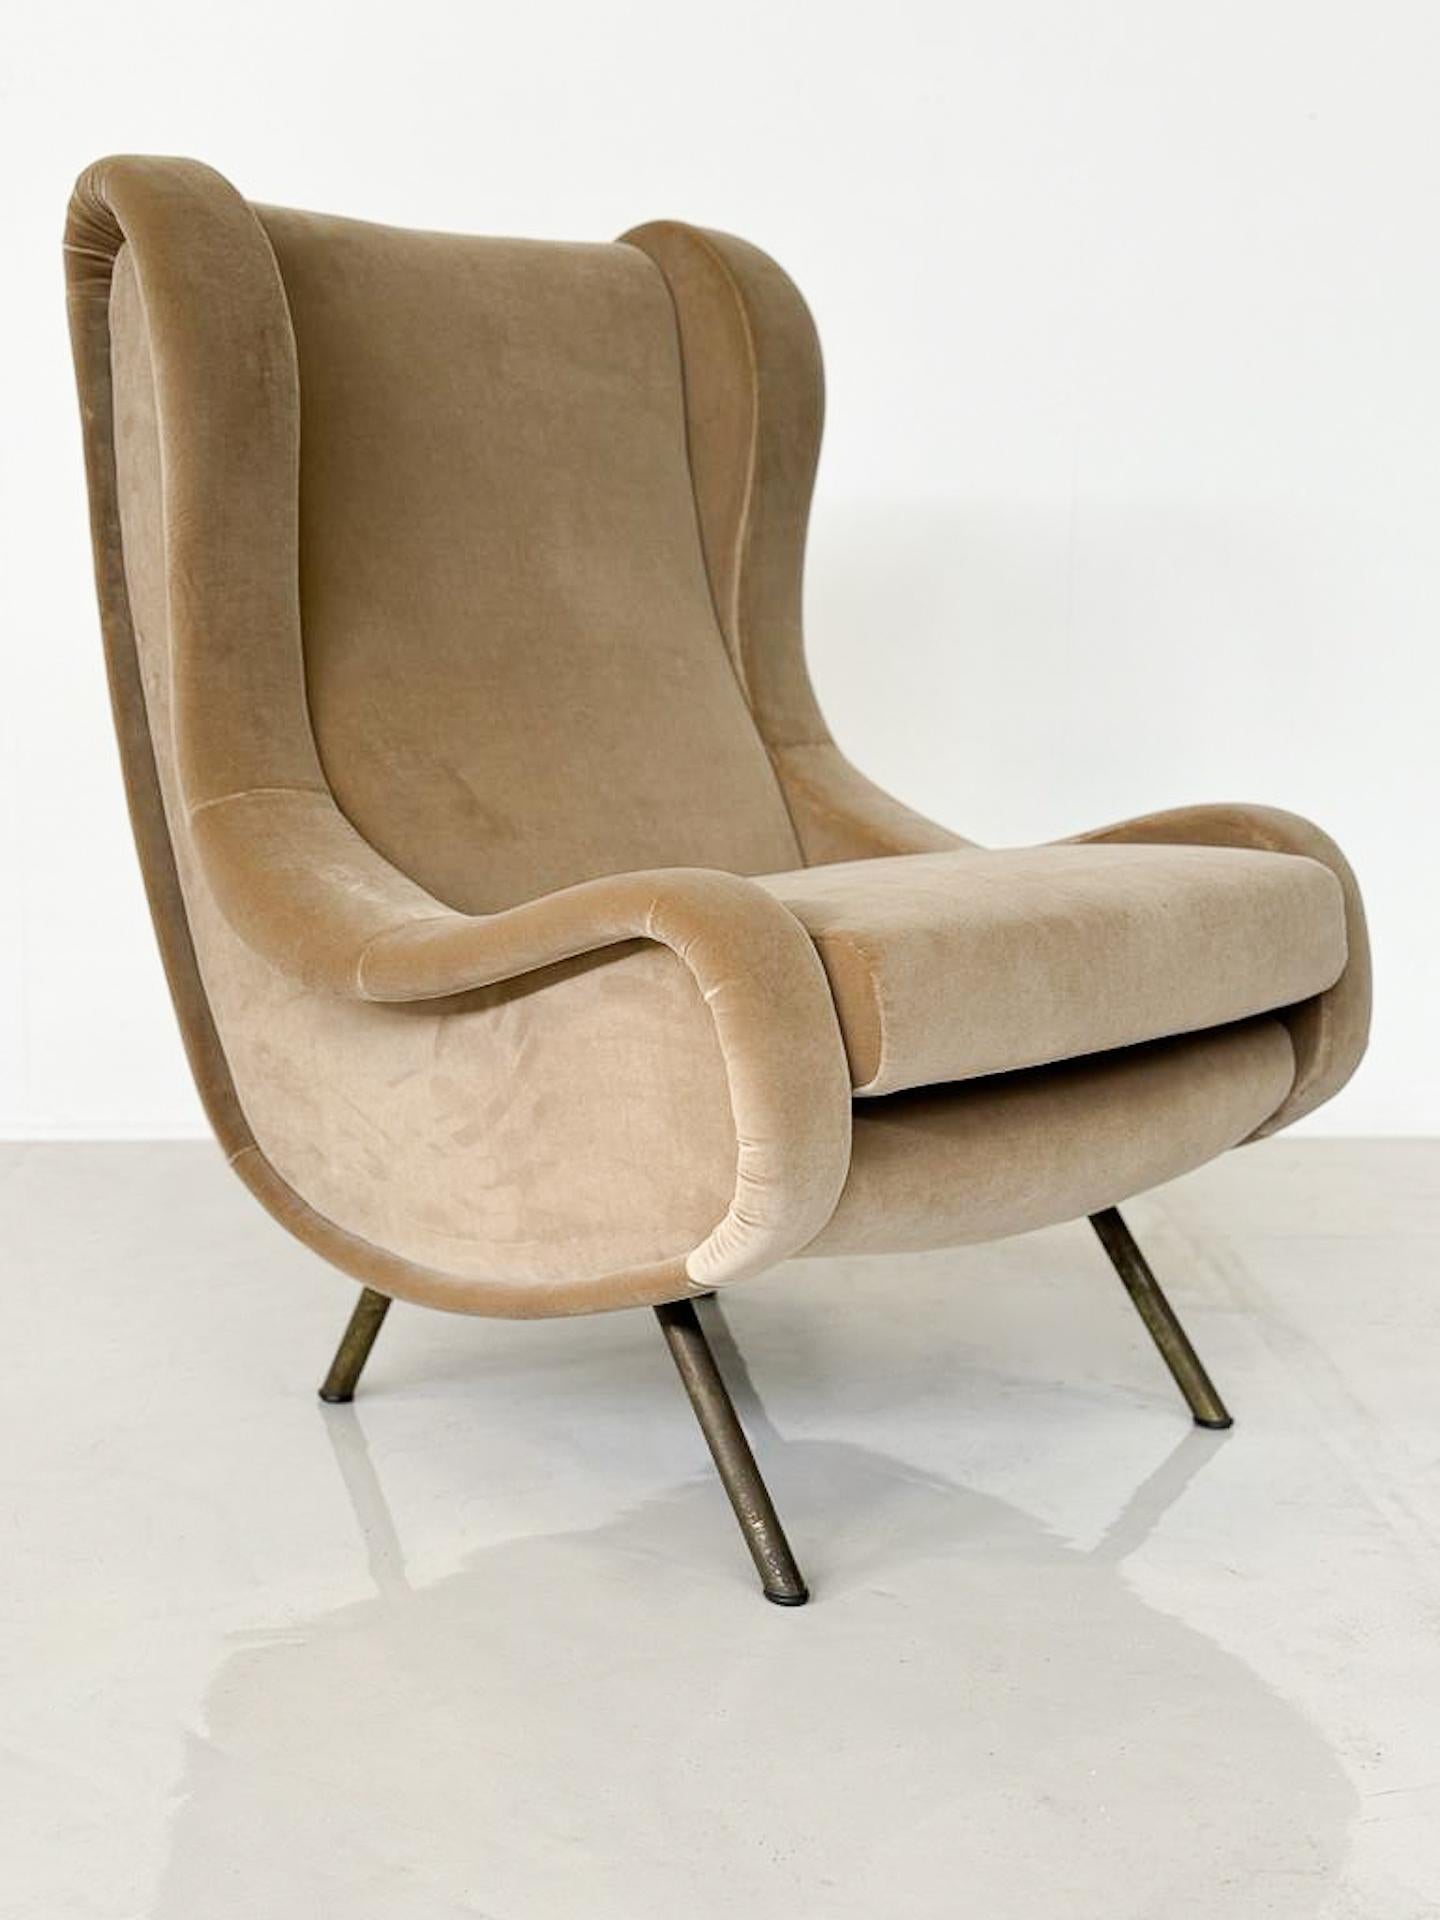 Italian Mid-Century Modern Armchair by Marco Zanuso, Italy, 1960s - New Upholstery For Sale